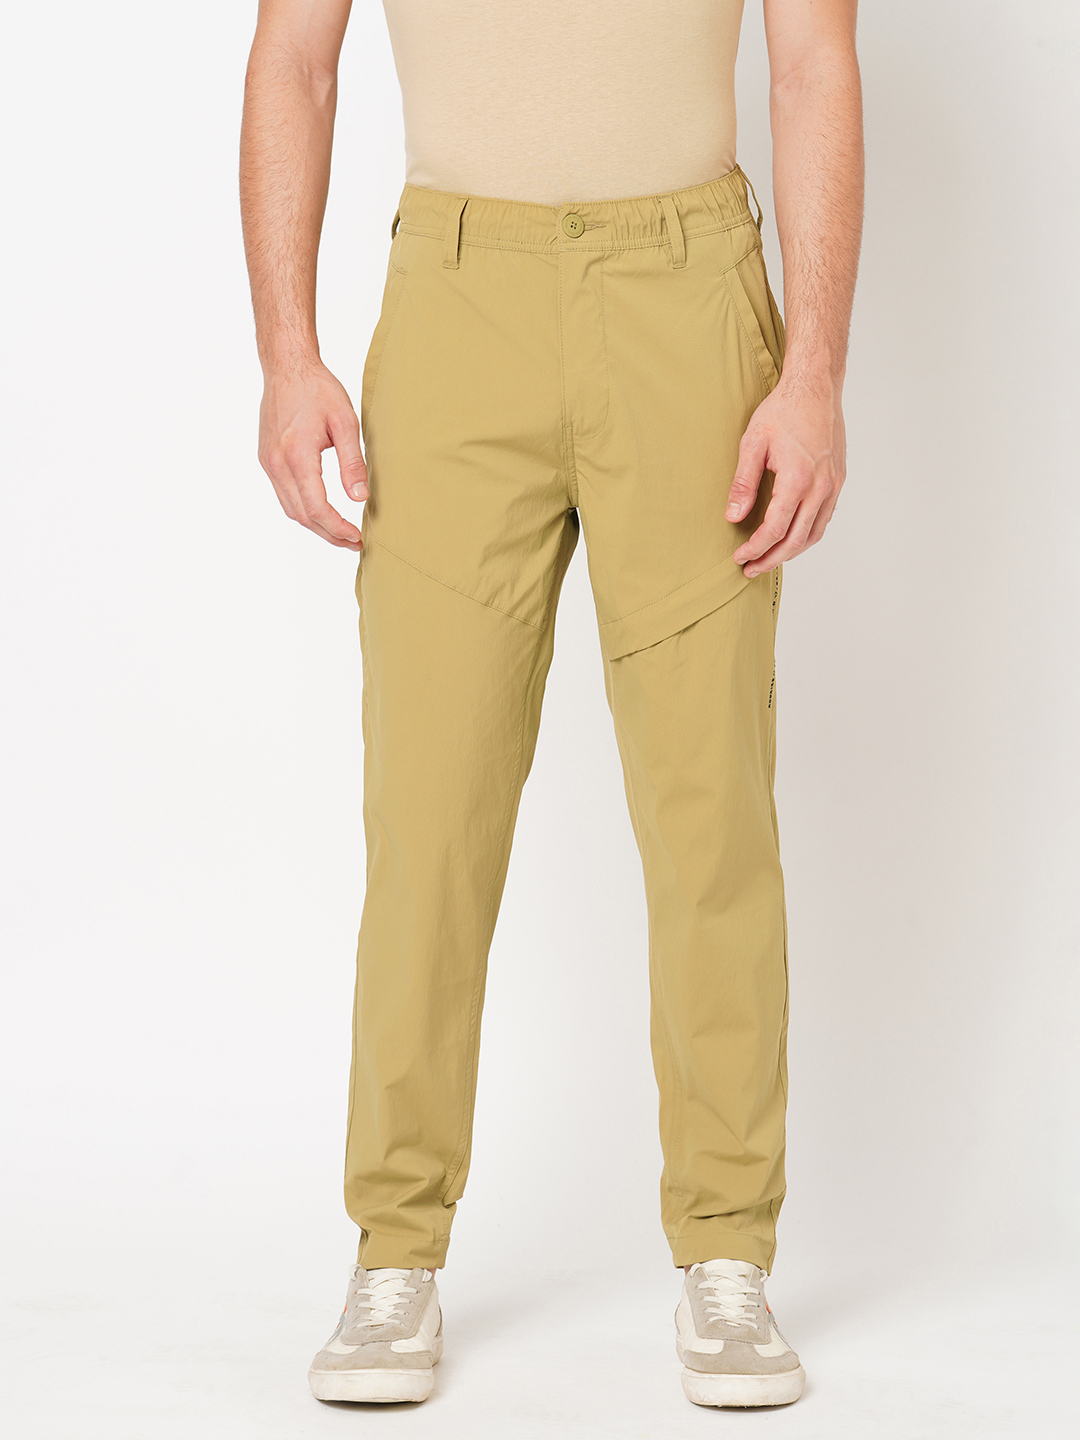 ANTIQUE BRONZE UTILITY PANT (SLIM TAPERED FIT)